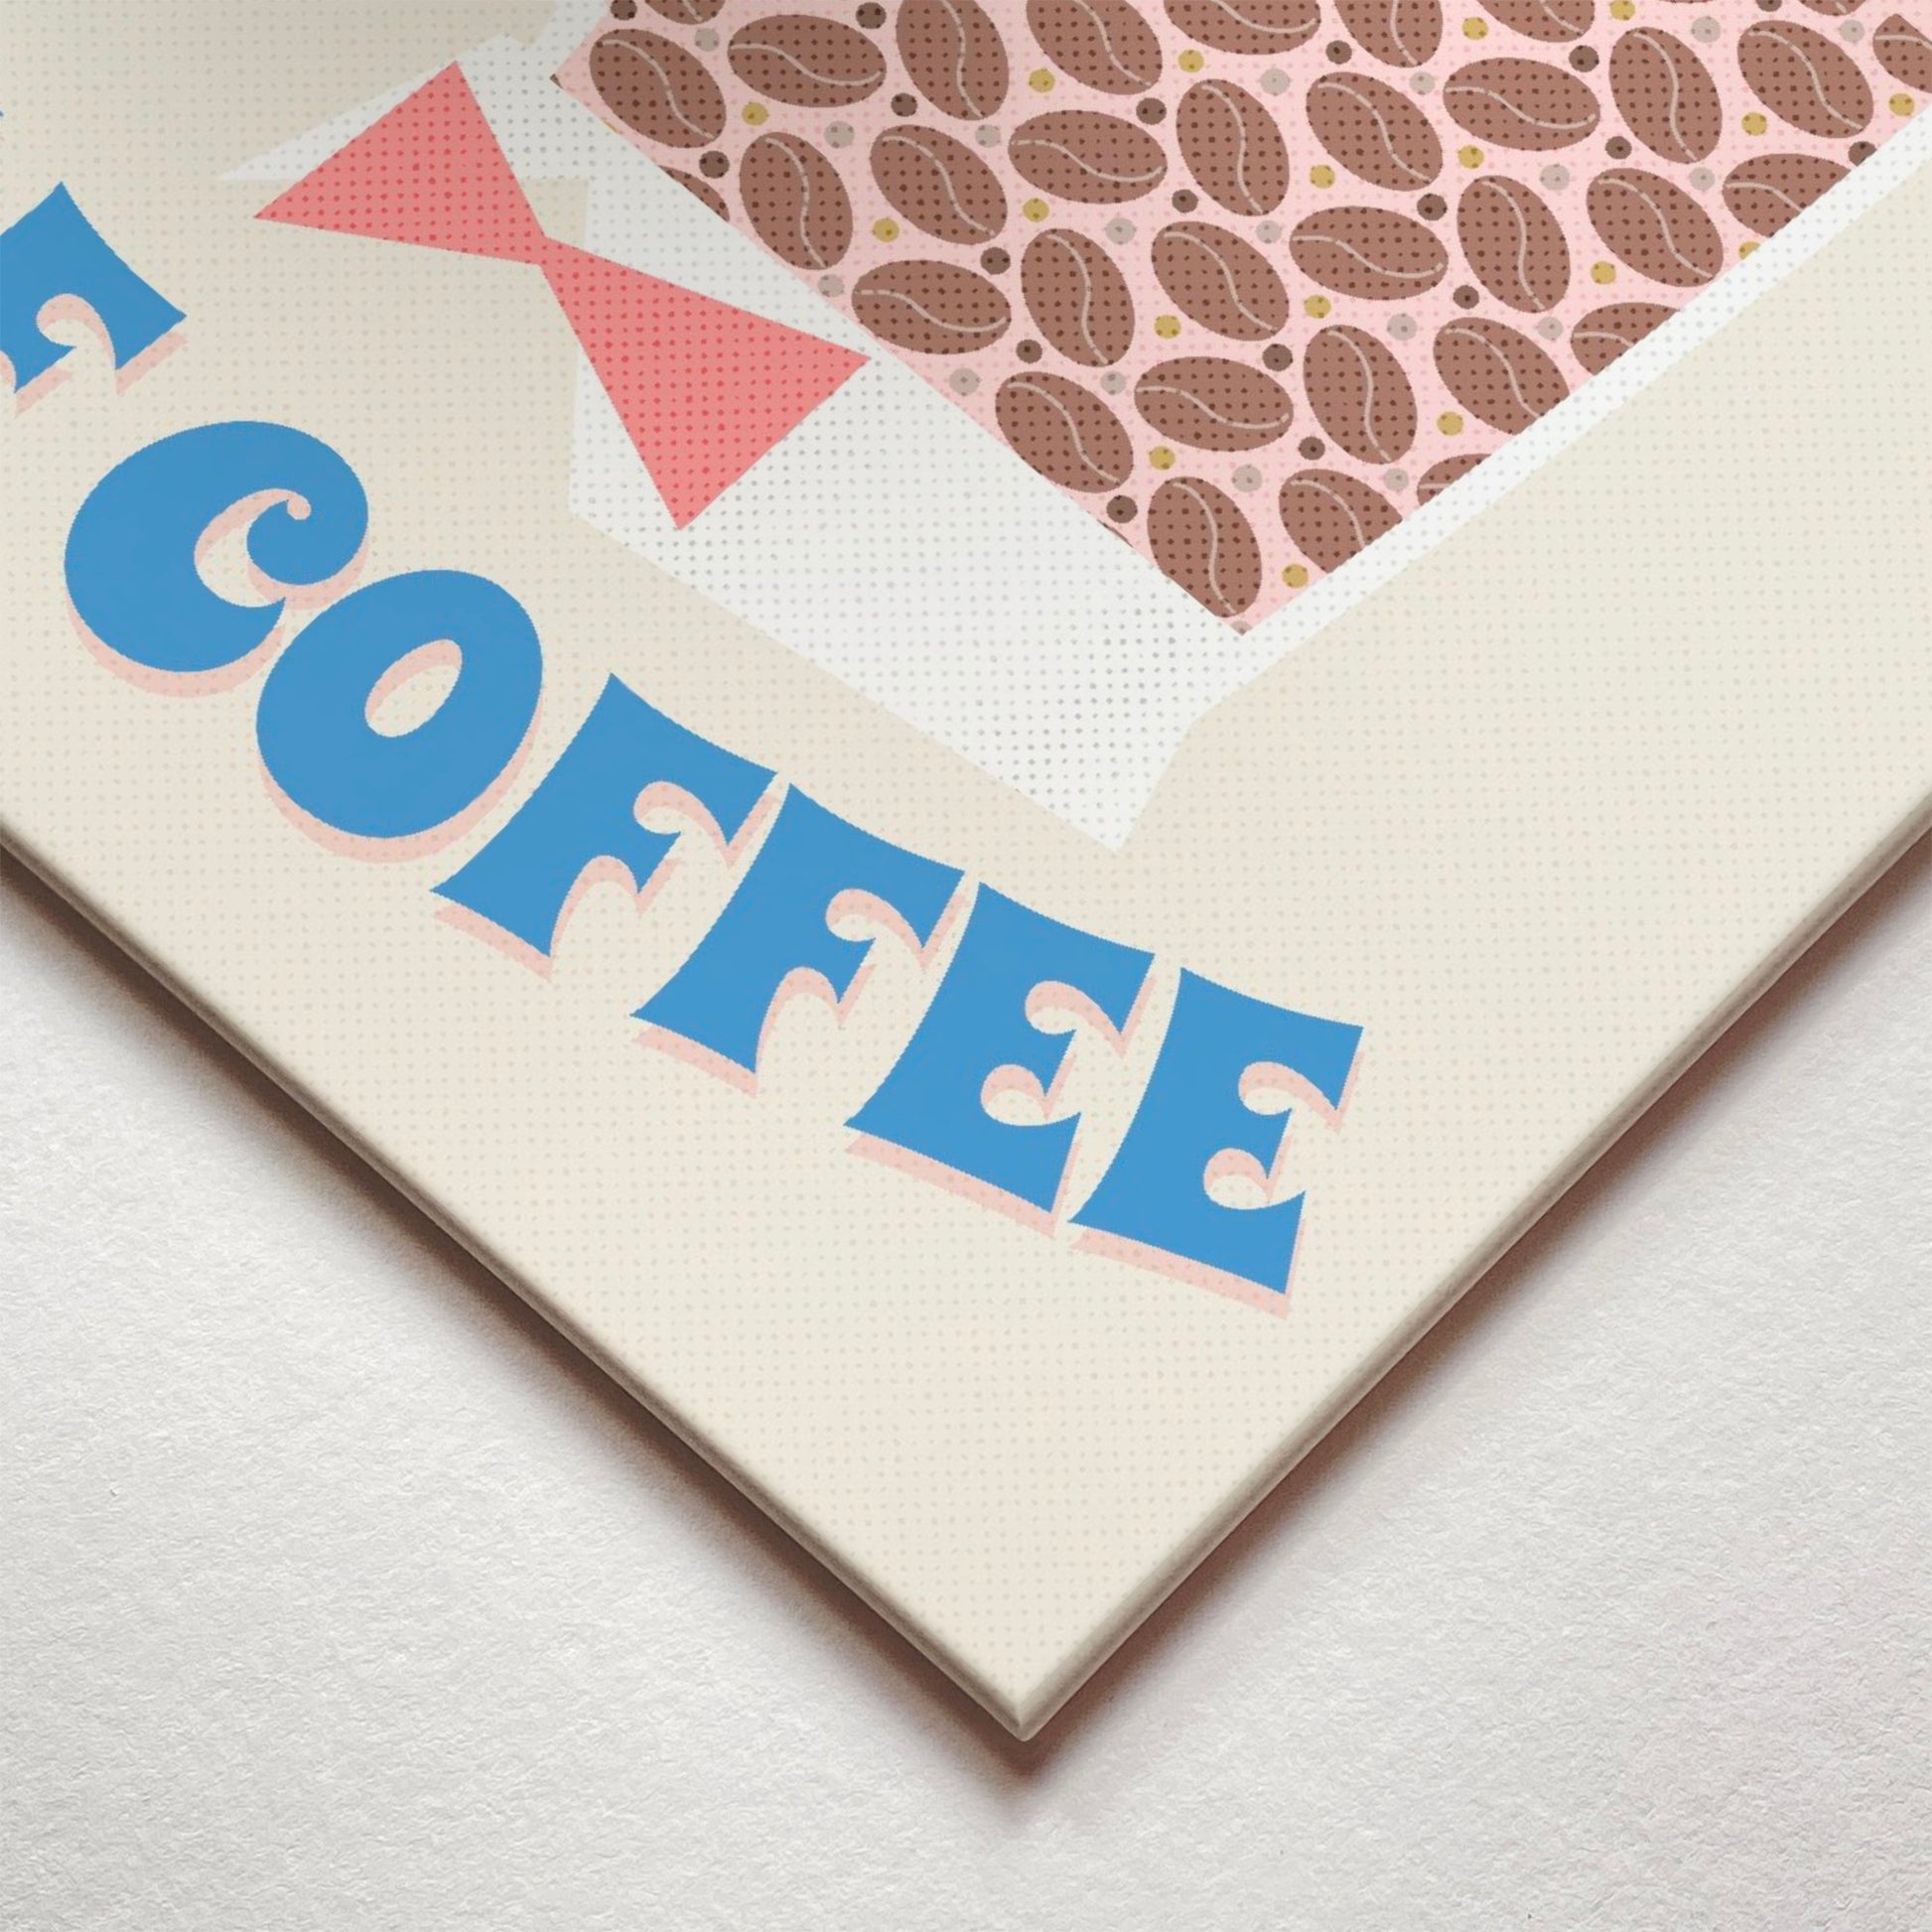 A closeup corner detail view of a metal art poster display plate with printed design of a Half Human Half Coffee' Fun Retro Quote